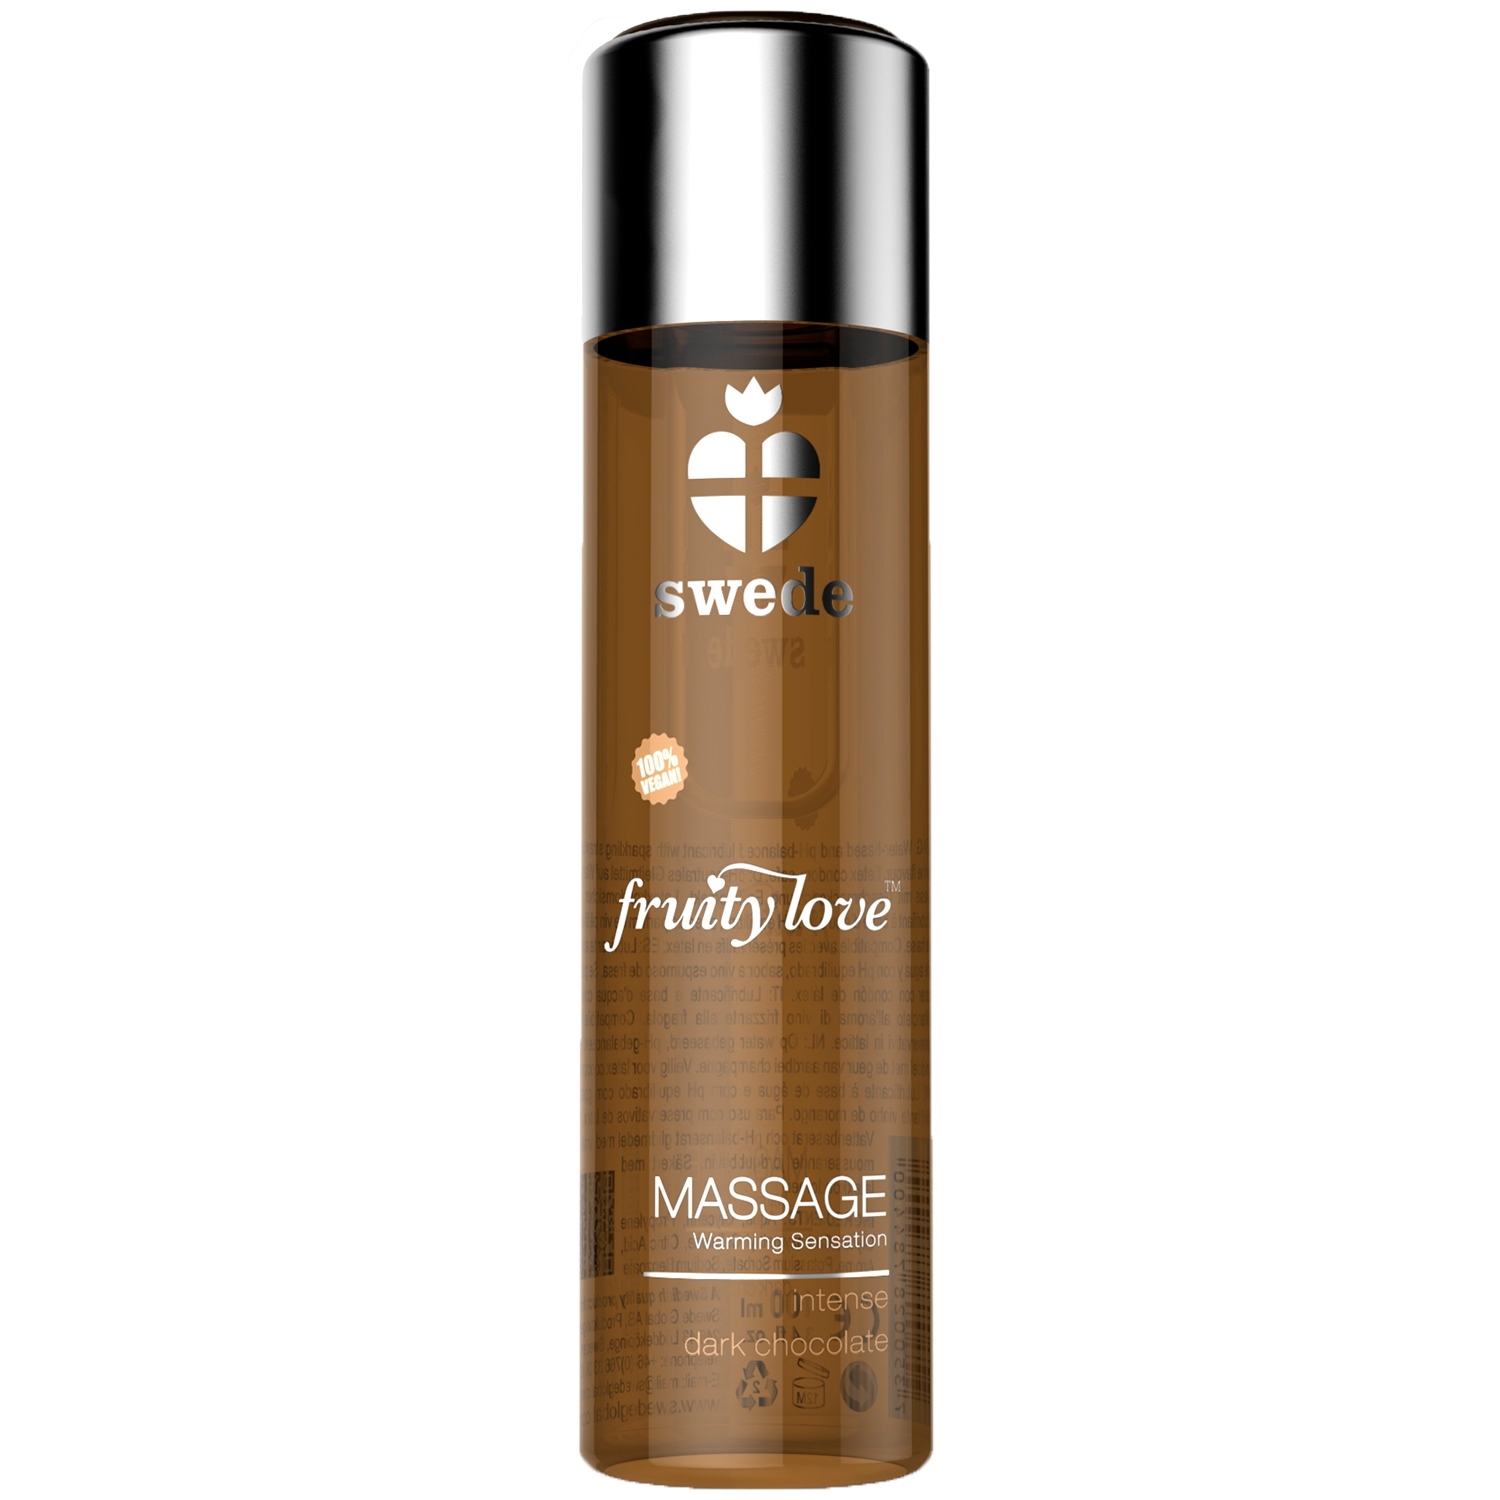 Swede Fruity Love Warming Flavoured Massage Lotion 120 ml - Clear